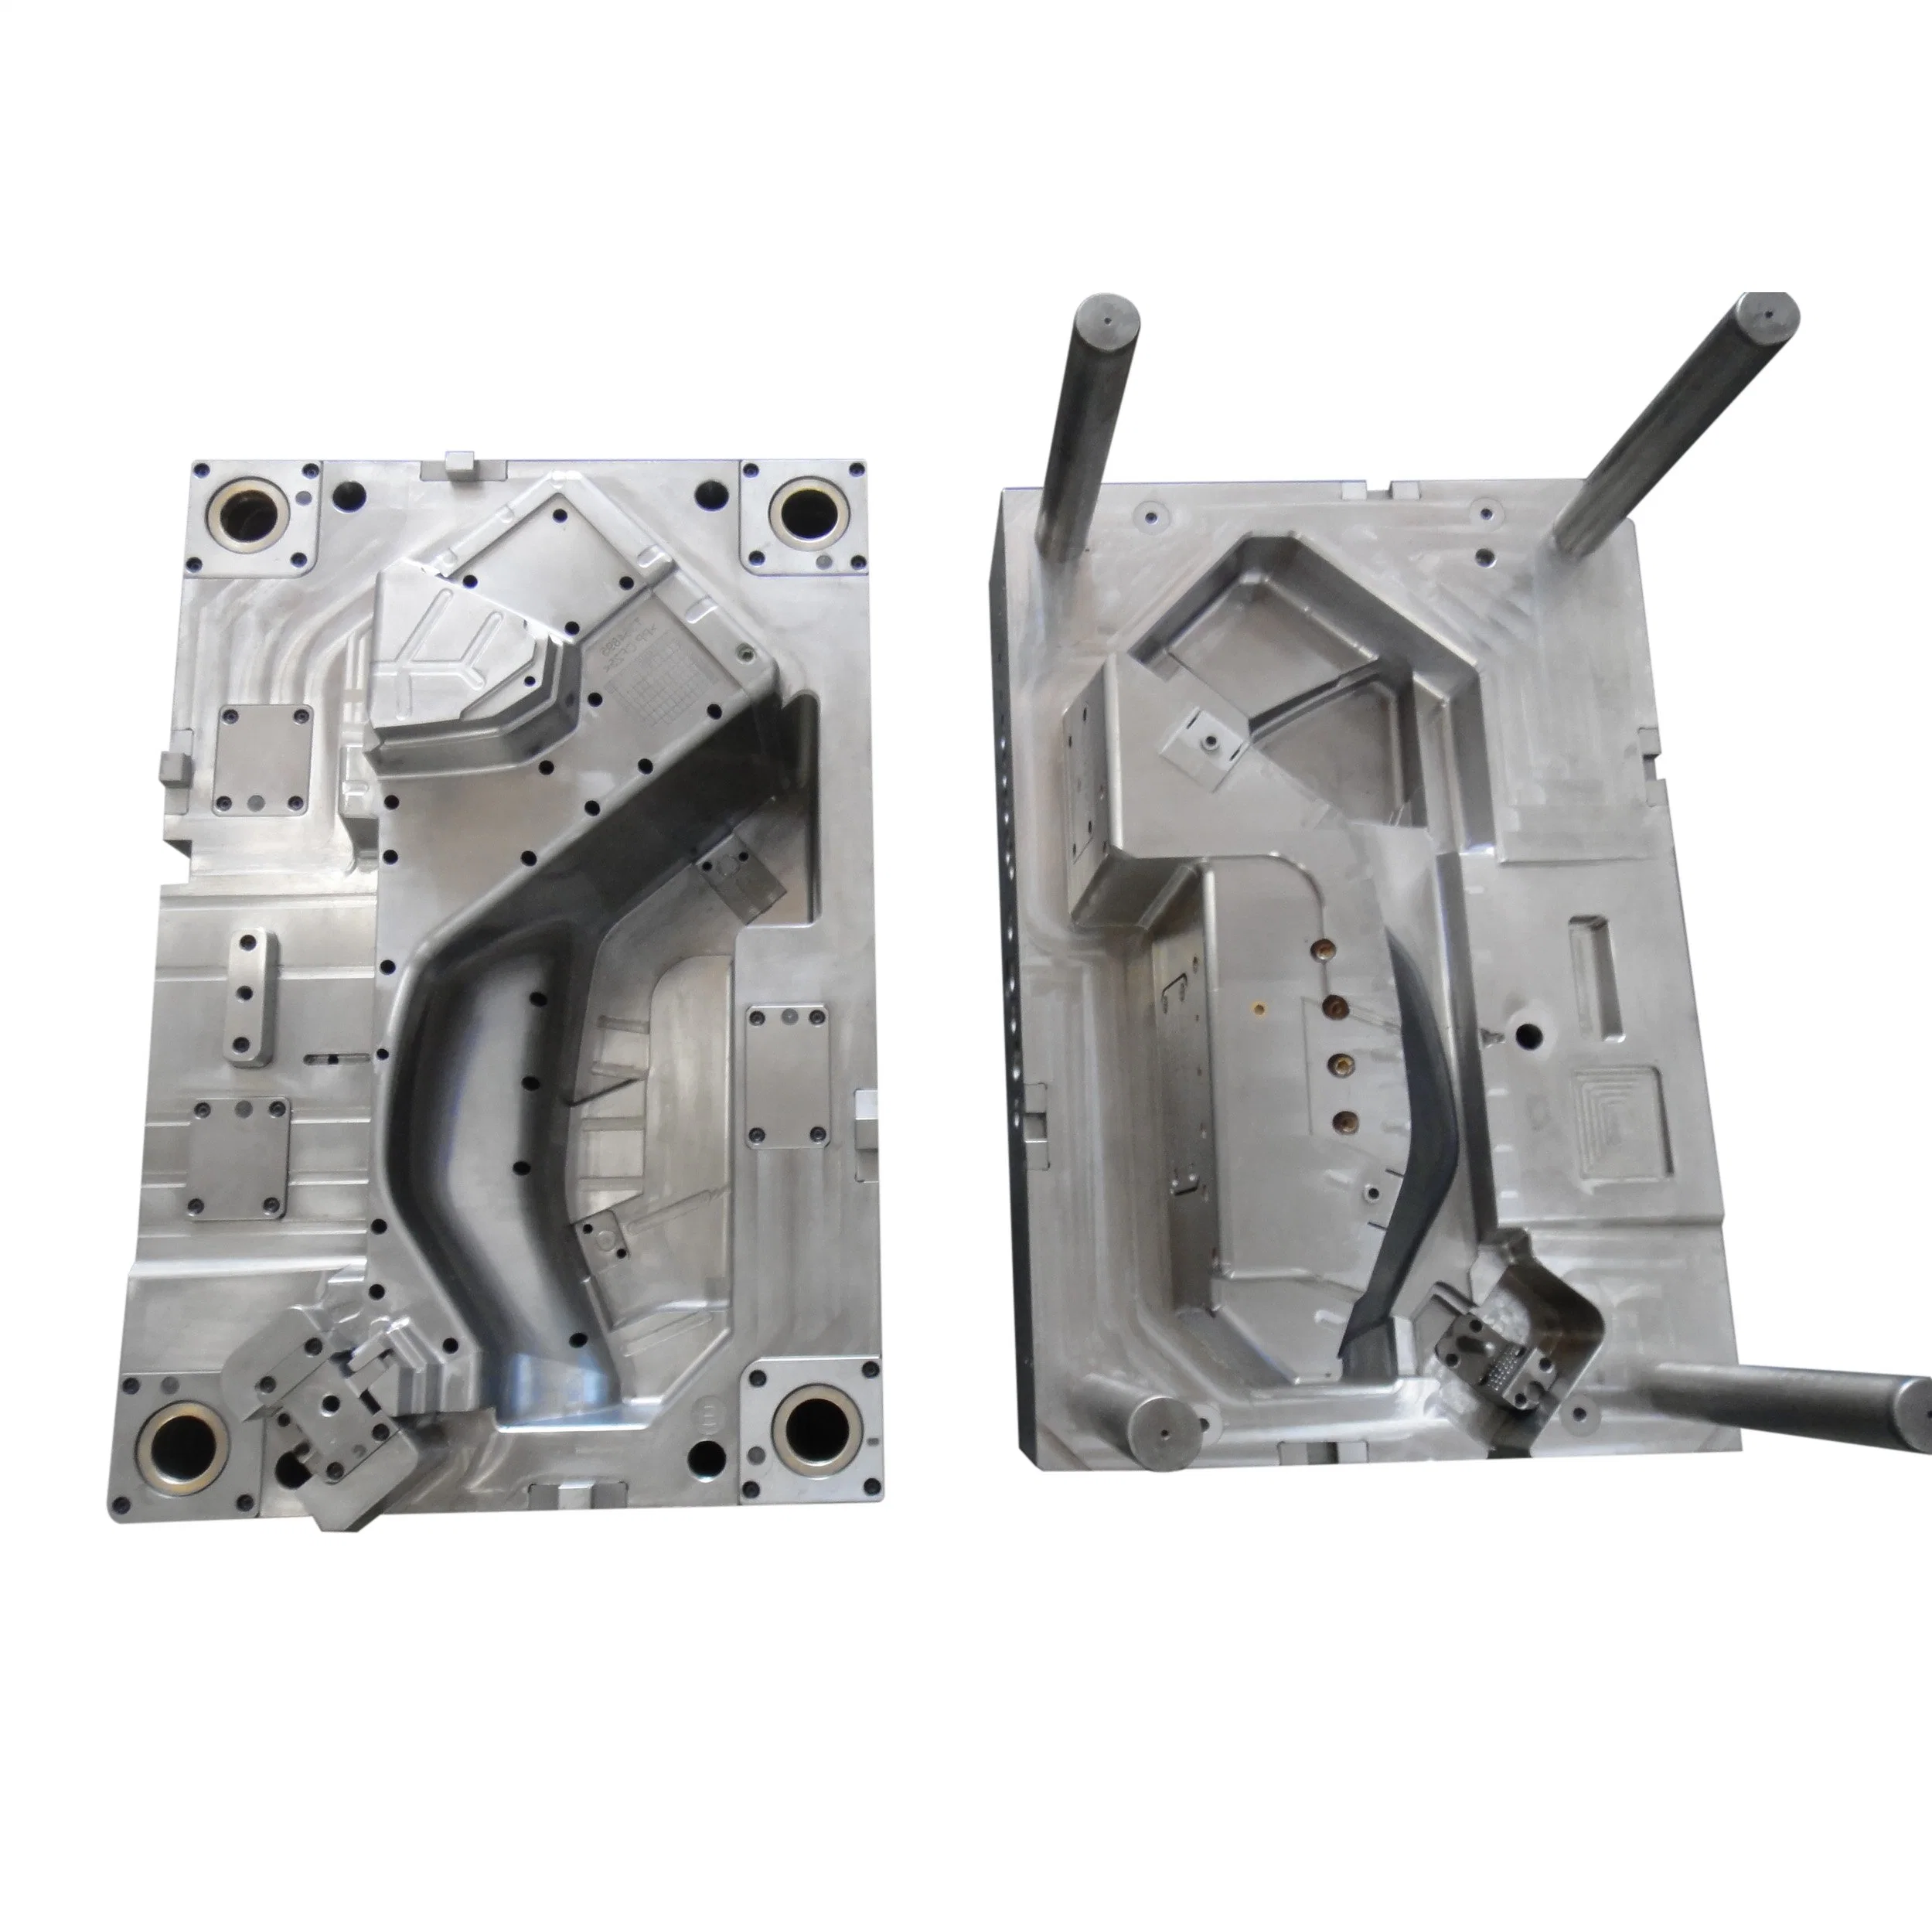 Customized High Quality Plastic Mold for Auto Parts